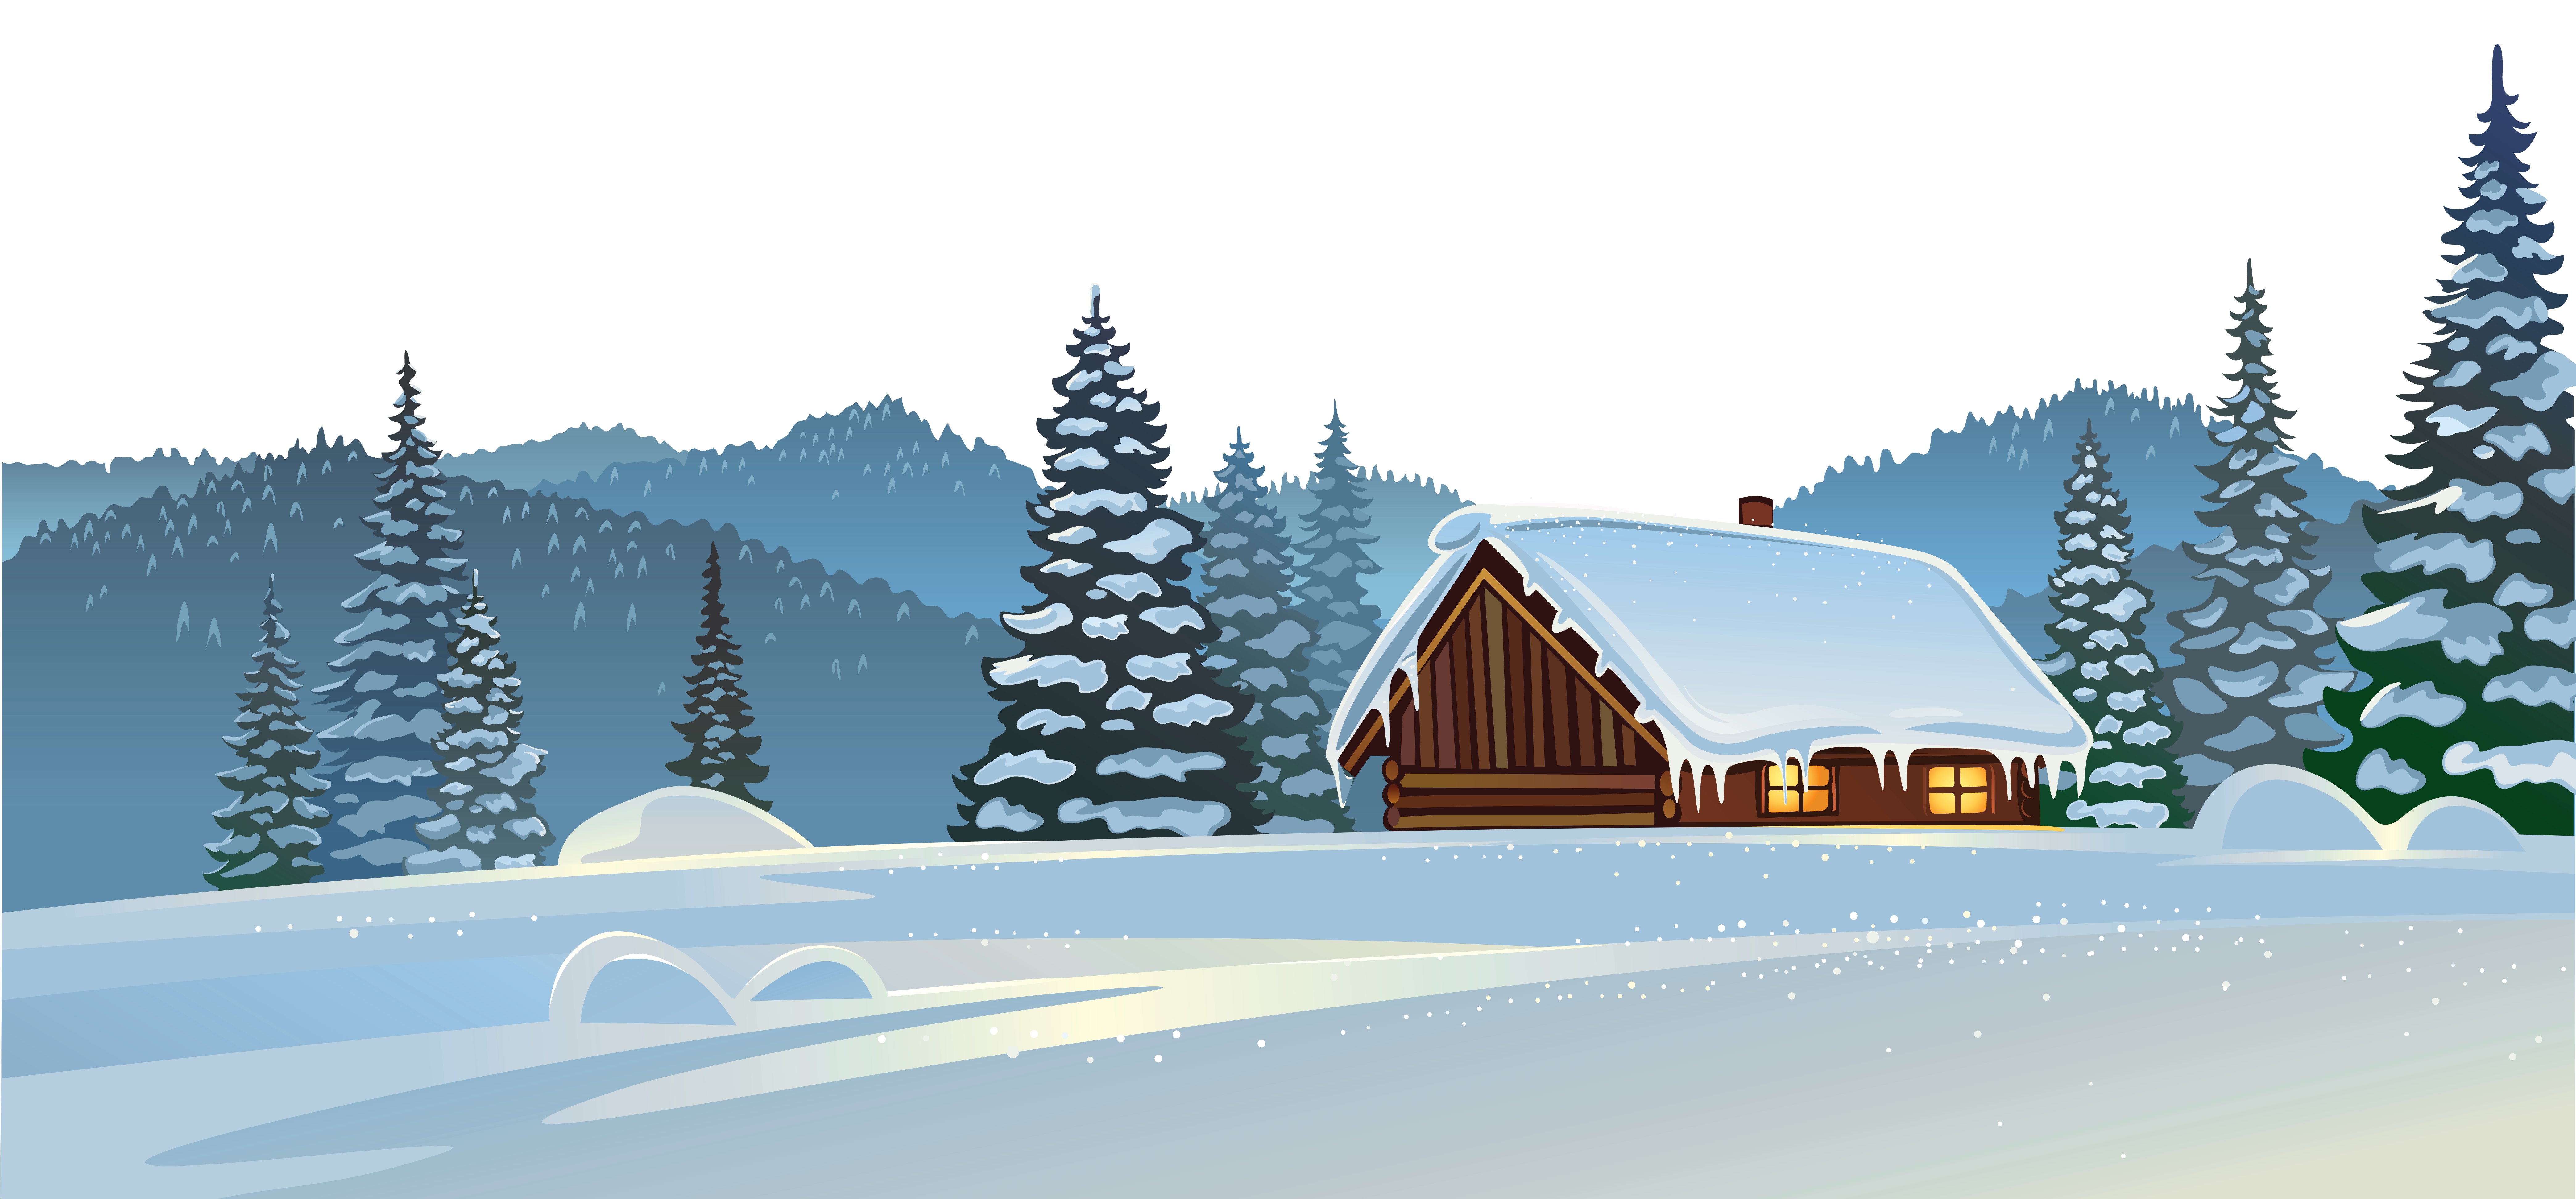 Snow cilpart beautiful inspiration. Snowboarding clipart animated winter holiday